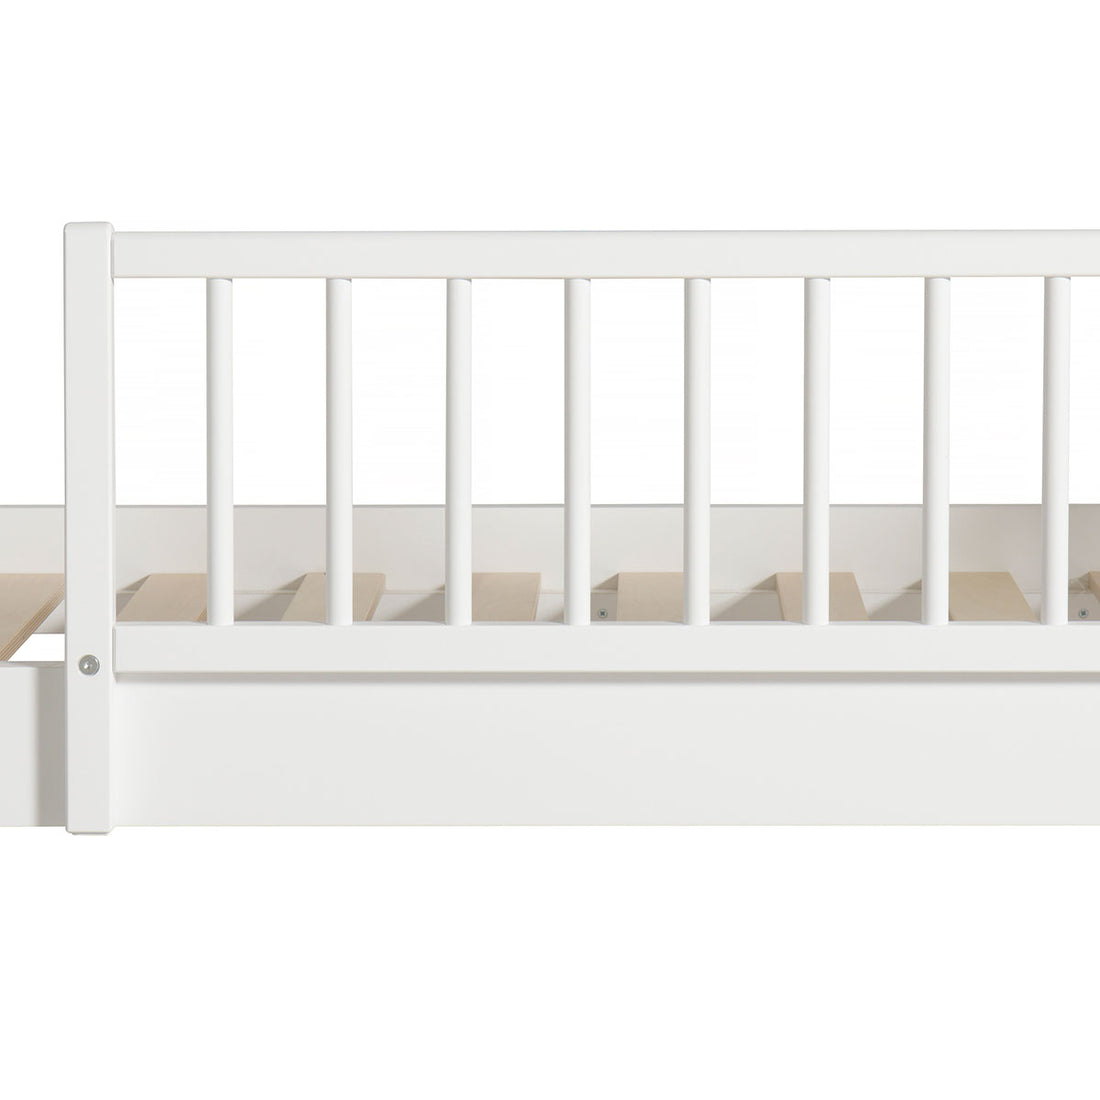 oliver-furniture-wood-bed-guard-for-wood-bed-junior-bed-day-bed-bunk-bed-white- (3)